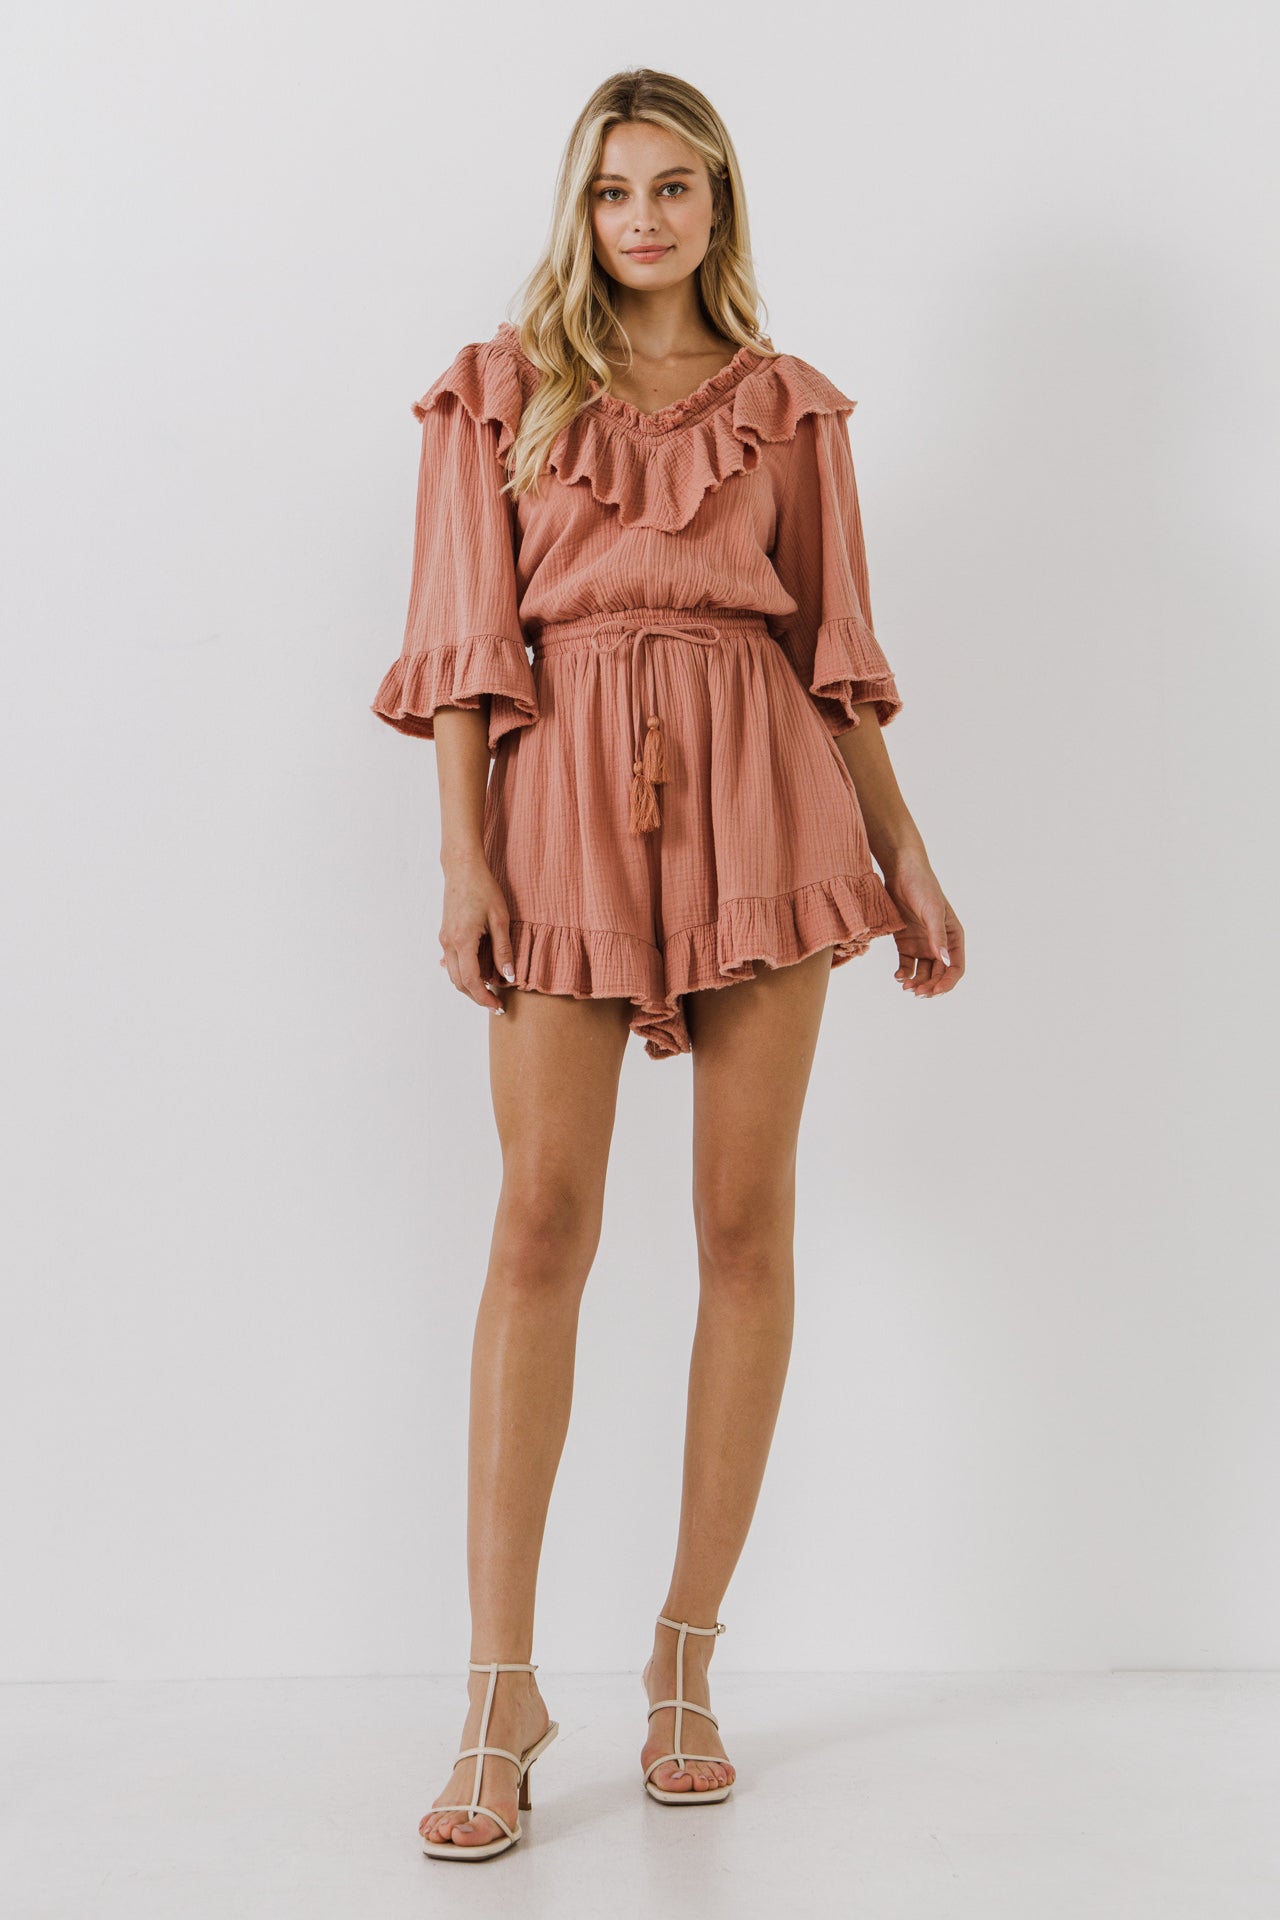 FREE THE ROSES - Ruffle Romper - ROMPERS available at Objectrare